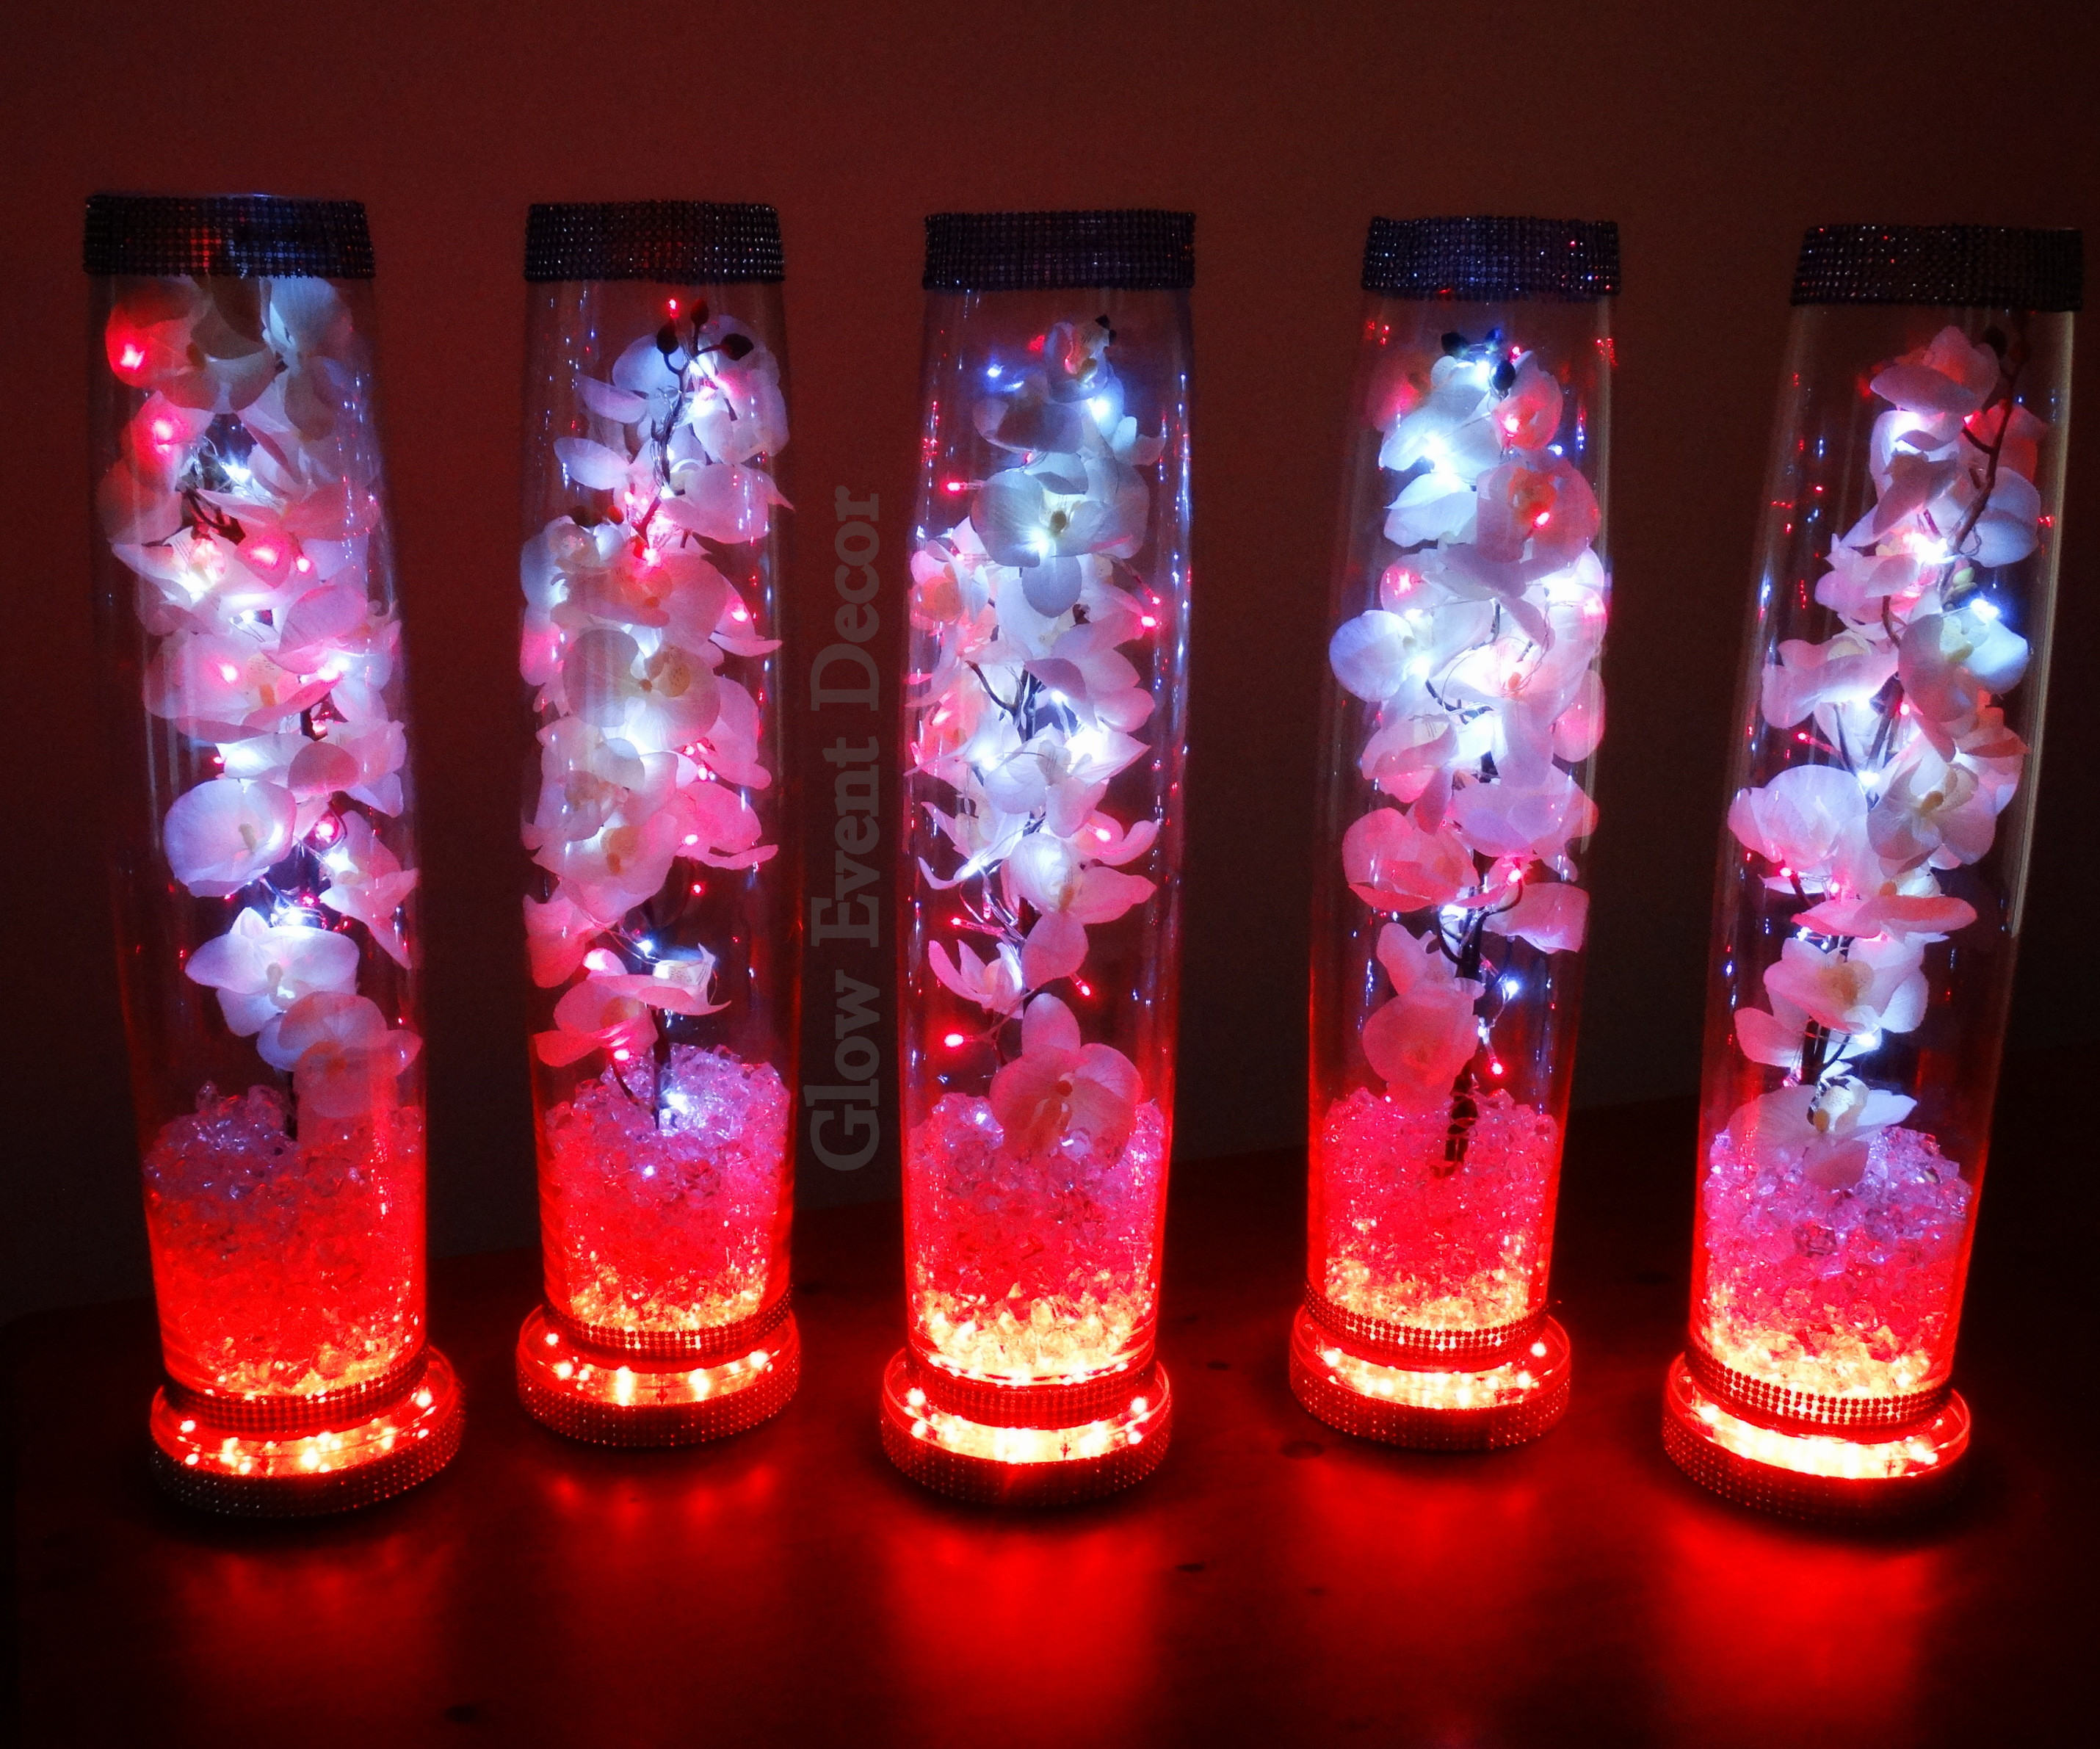 29 Great Led Base Lights for Vases 2024 free download led base lights for vases of led orchid cylinder vase glow event decor inside cylinder vase trio submerged lillies gyp sophlia bablies breath crystal garland for bridal